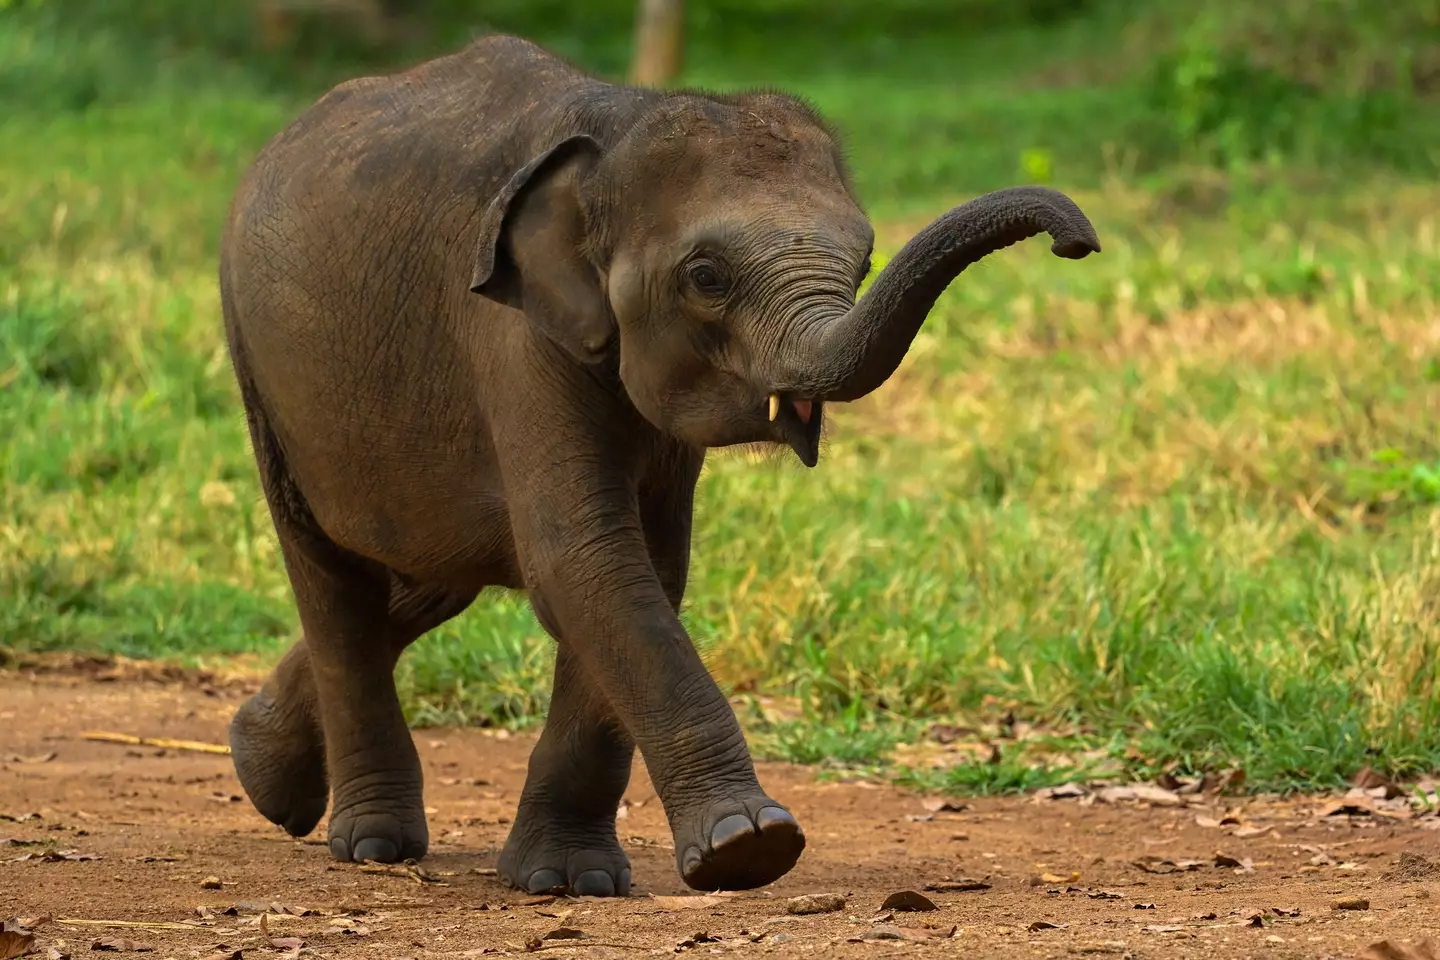 The veteran broadcaster defended the decision not to save the baby elephant while filming for his BBC Africa series.